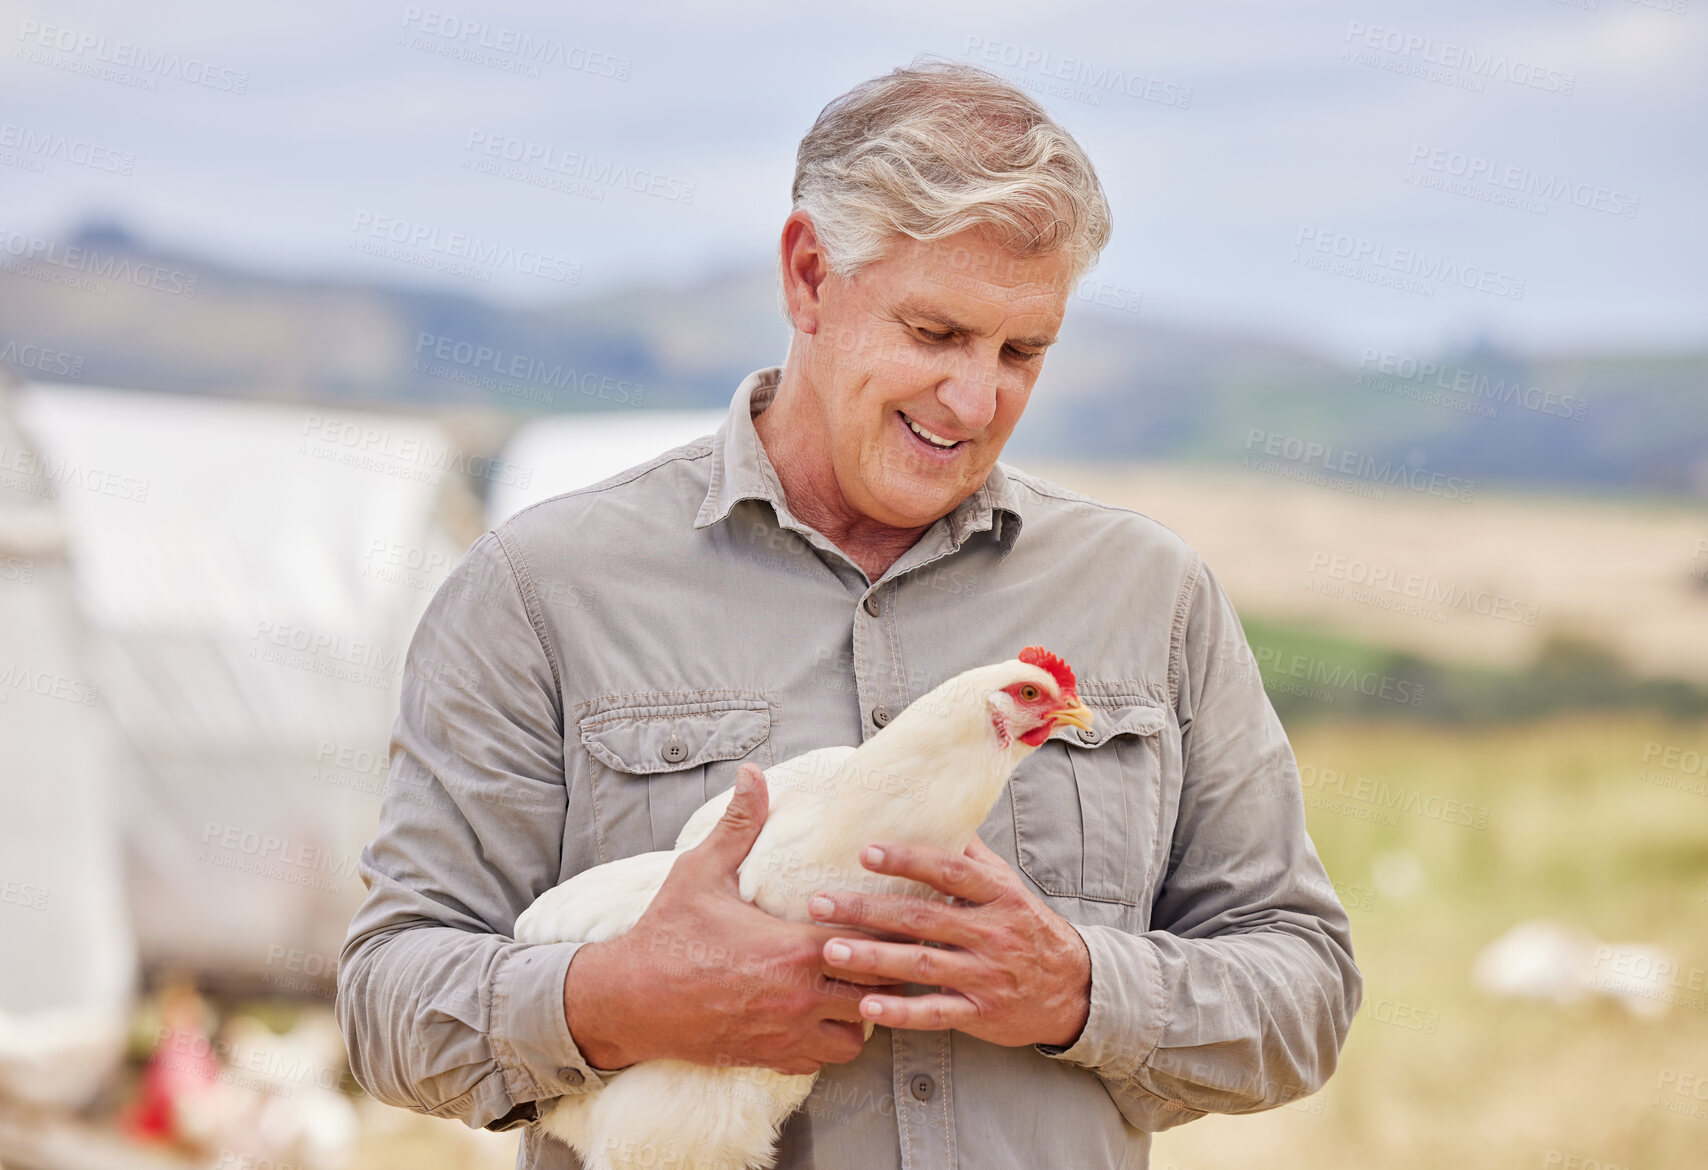 Buy stock photo Shot of a mature man working on a poultry farm